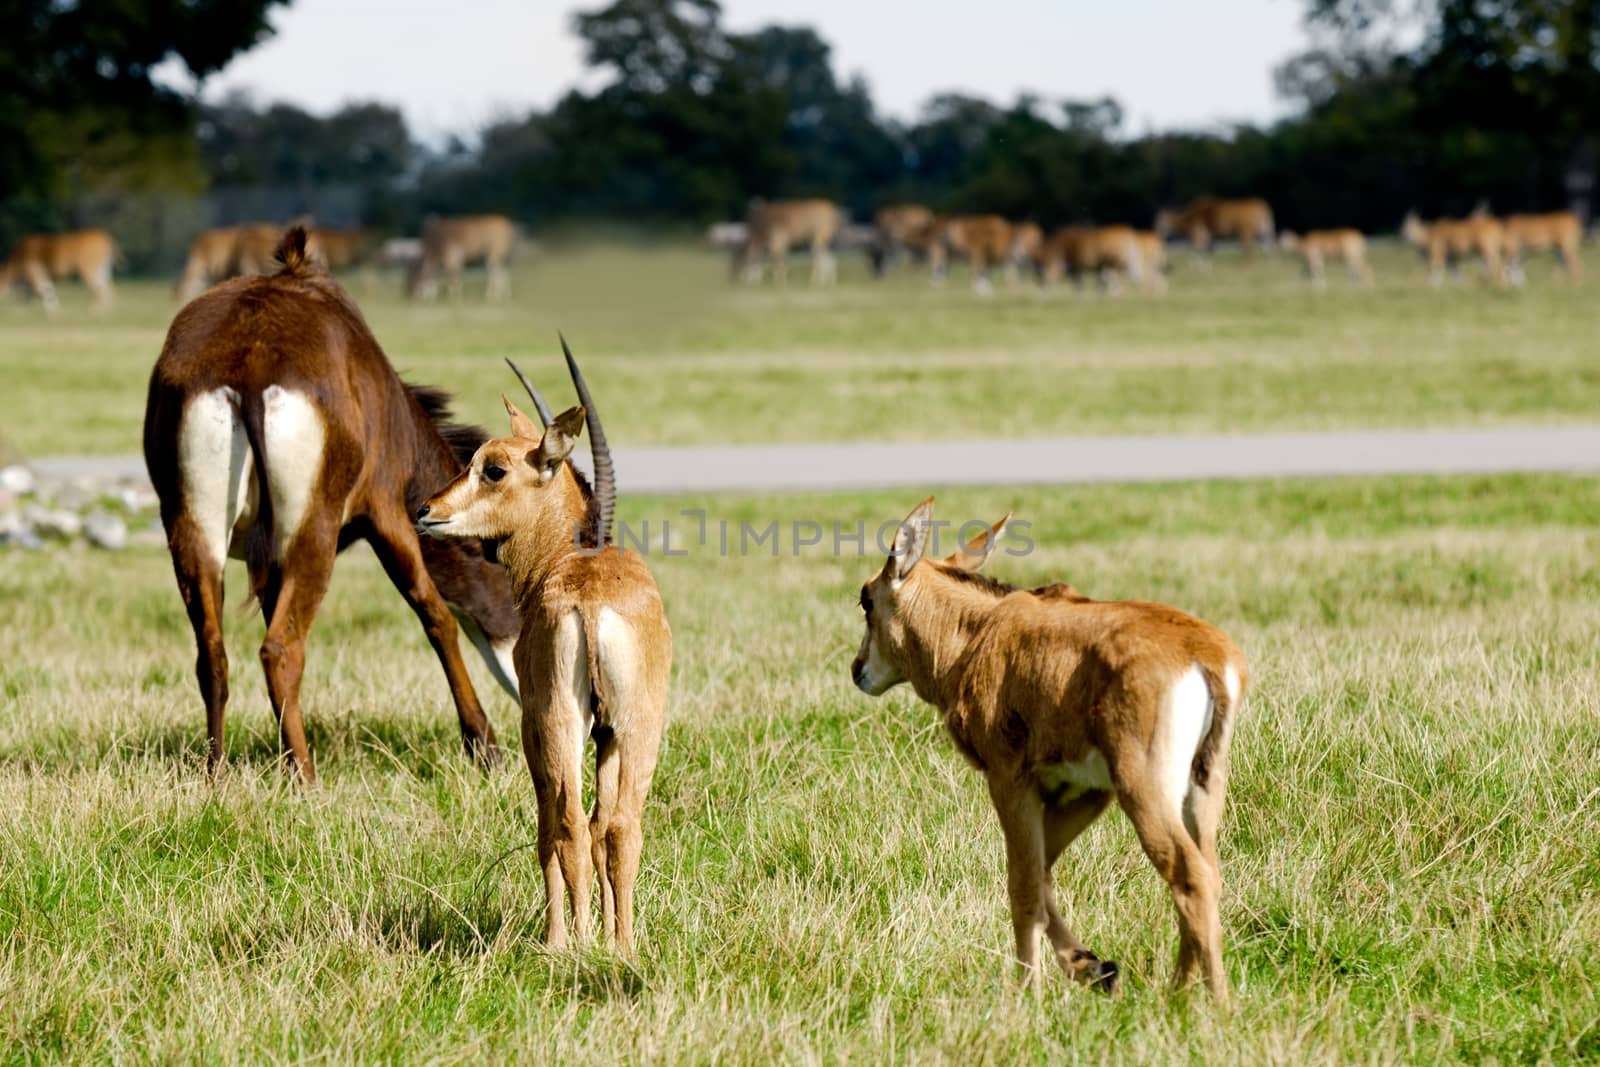 Antelopes are standing on green grass by cfoto